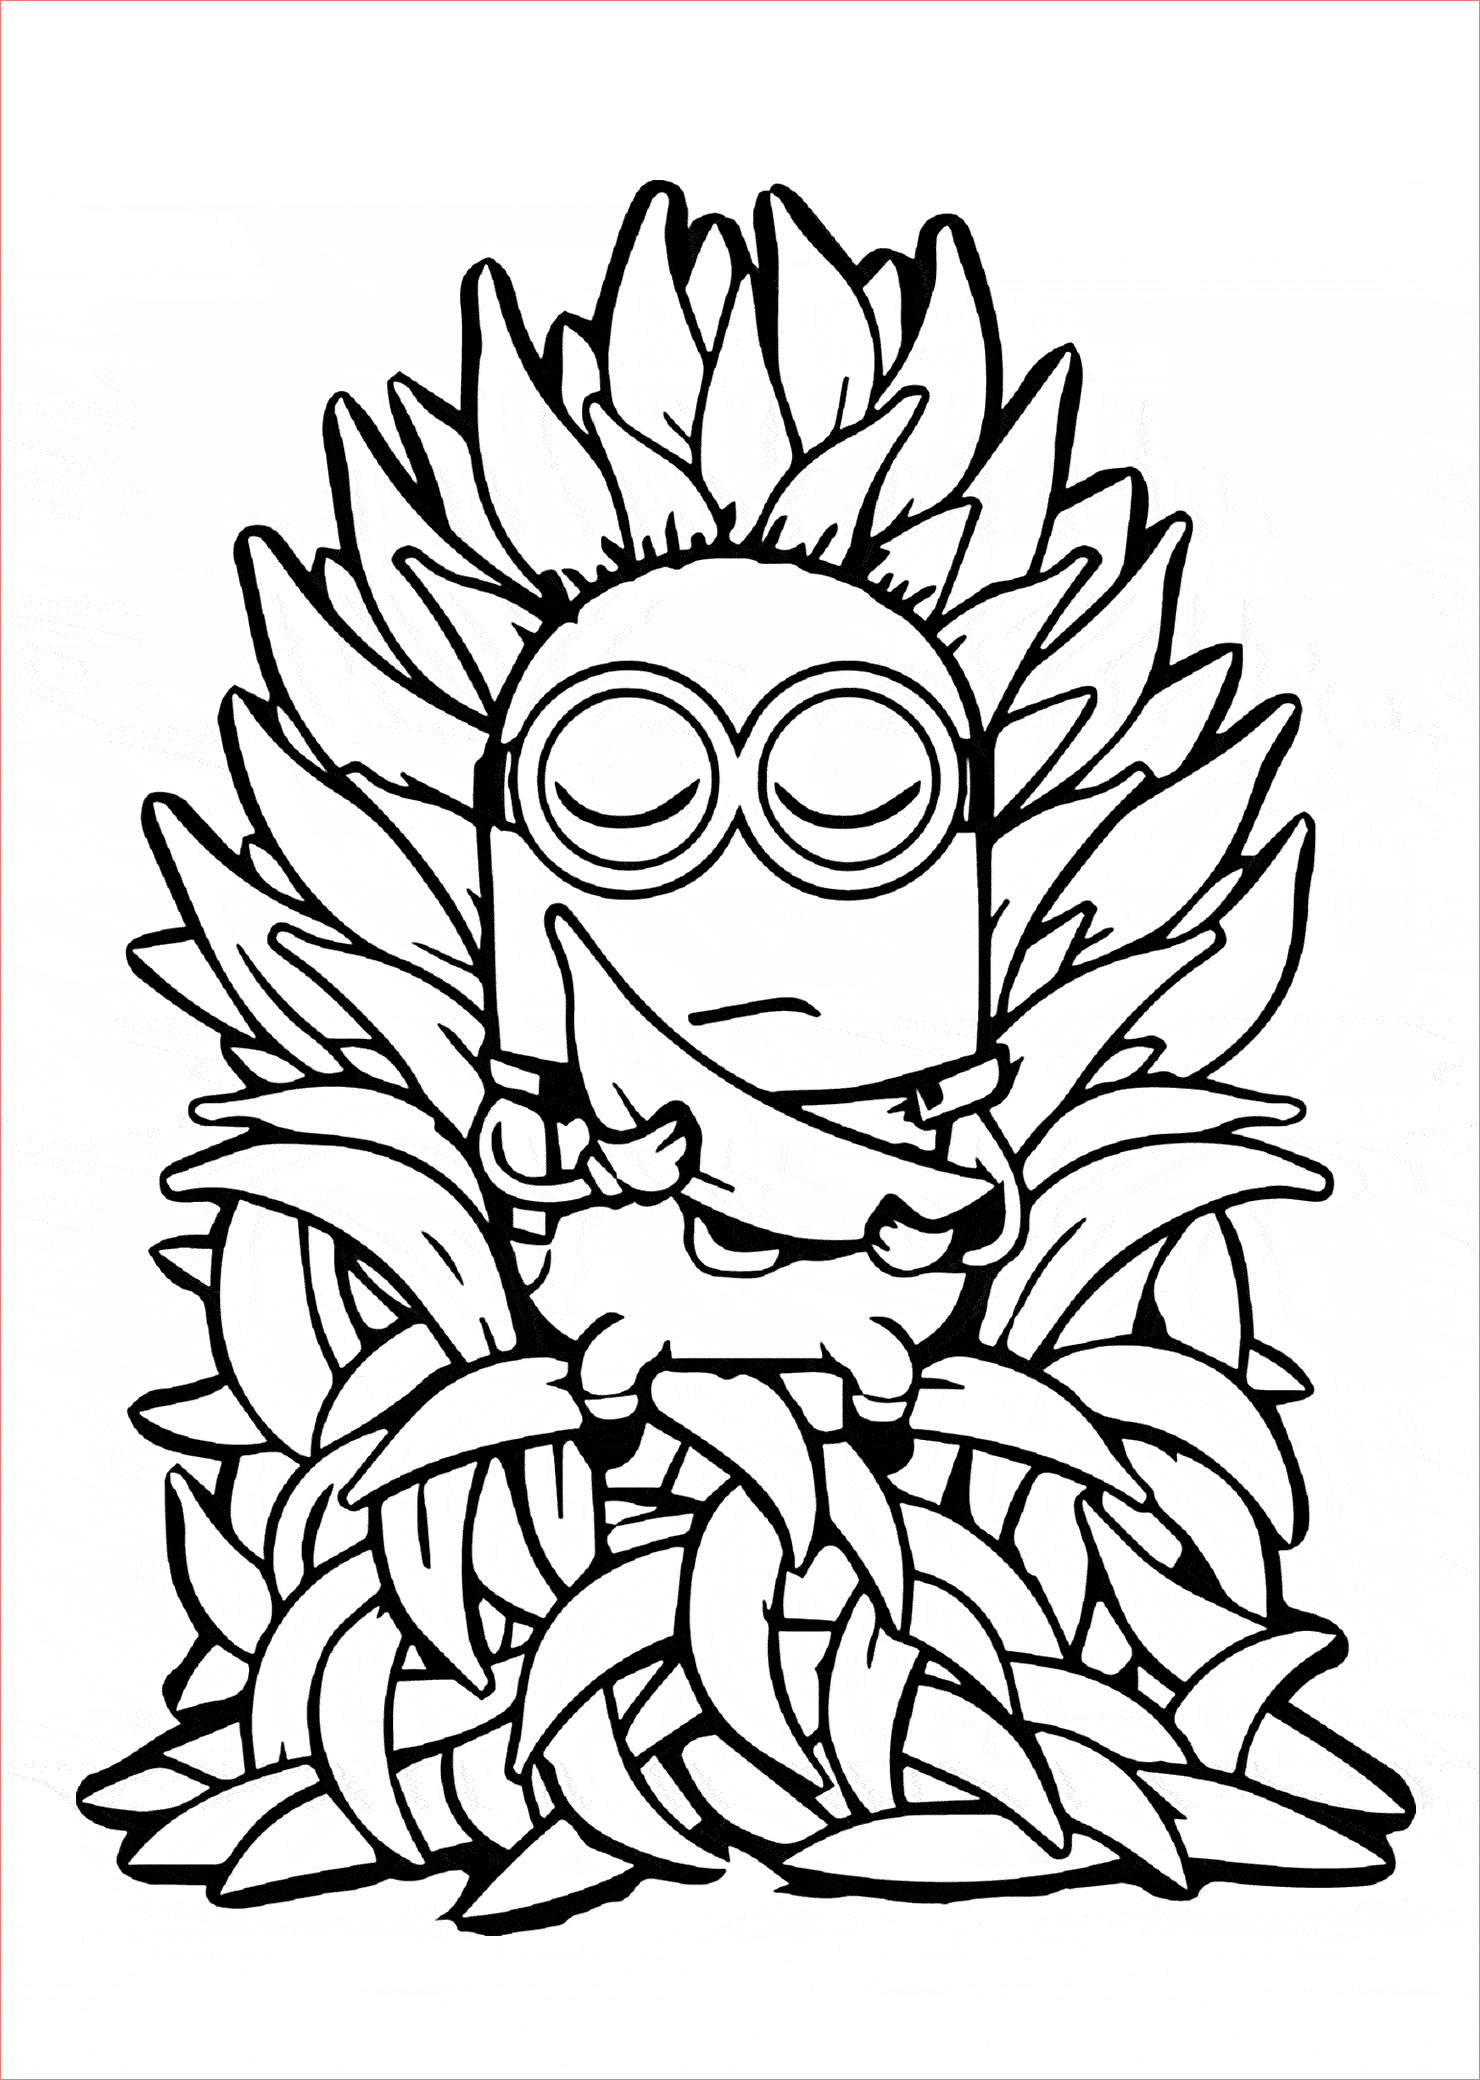 image=minions Coloring for kids minions 9580 2